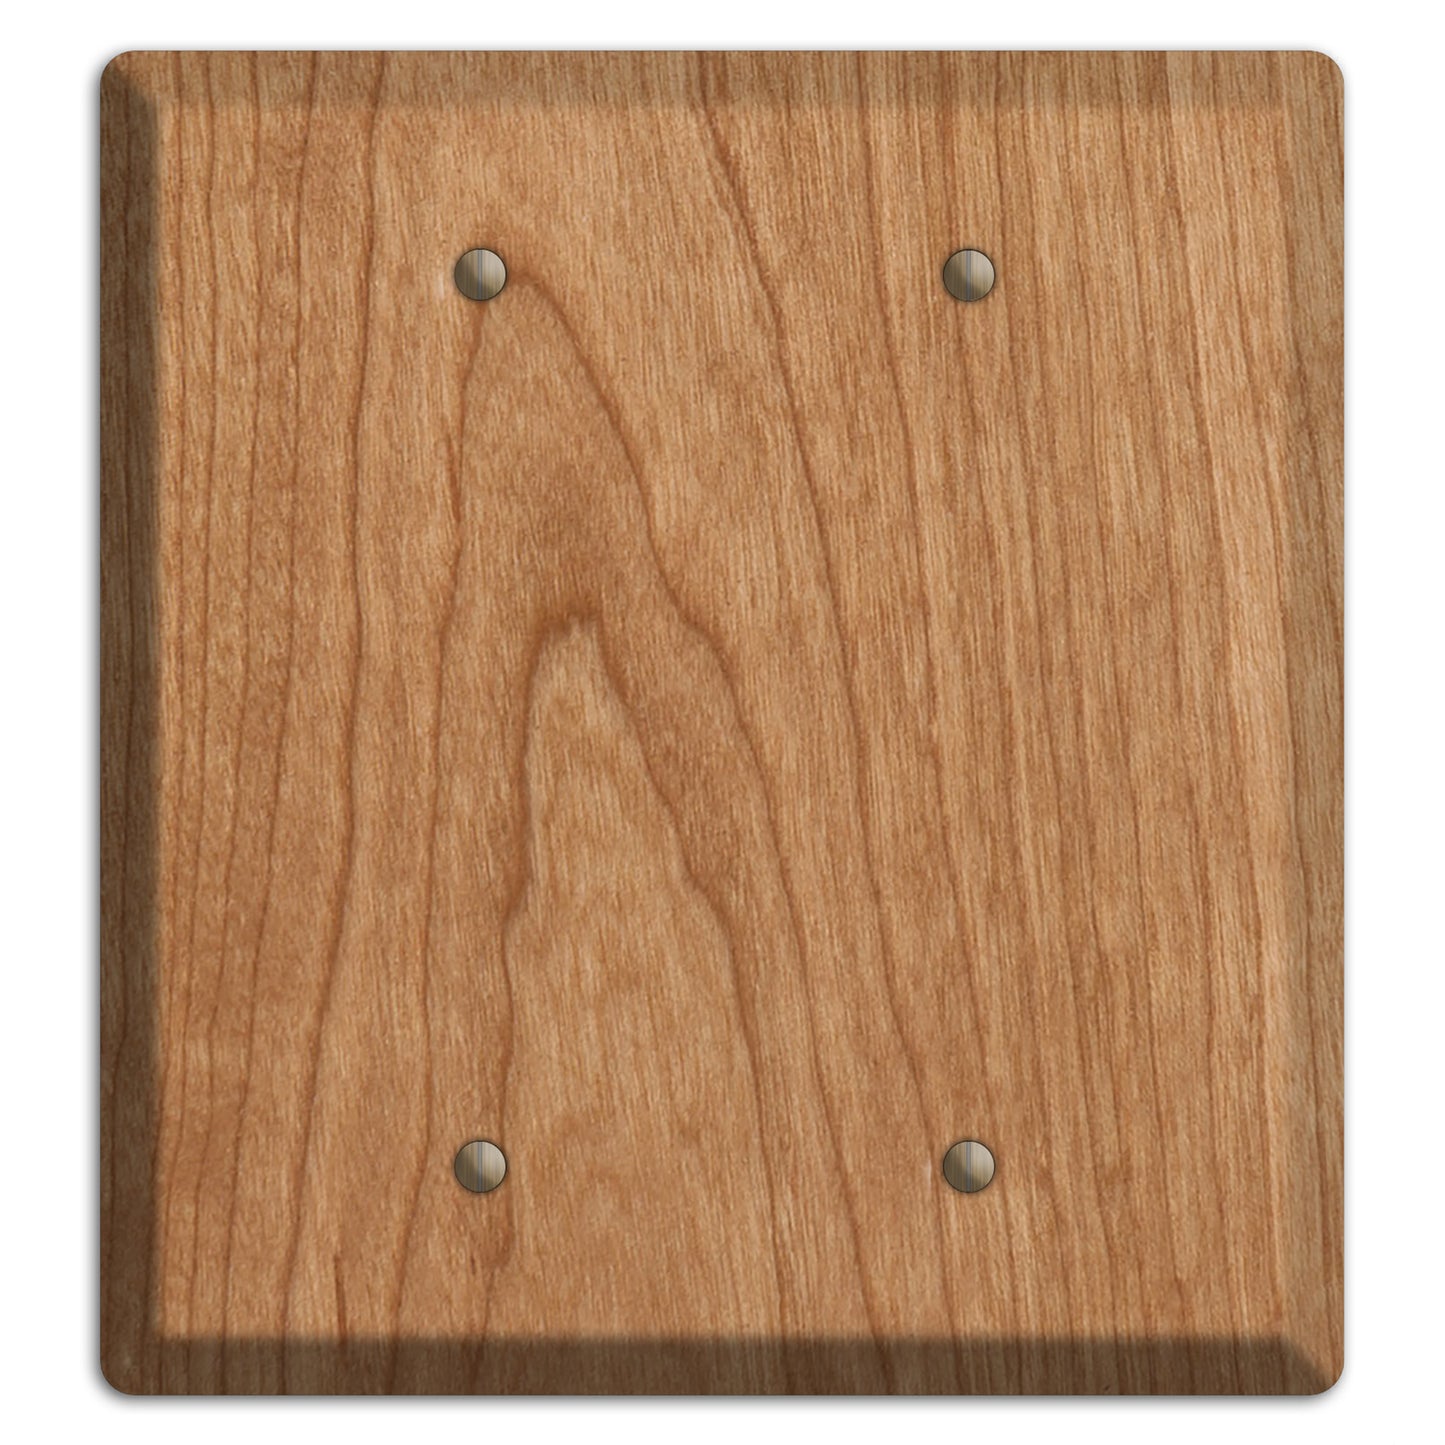 Unfinished Cherry Wood Double Blank Cover Plate